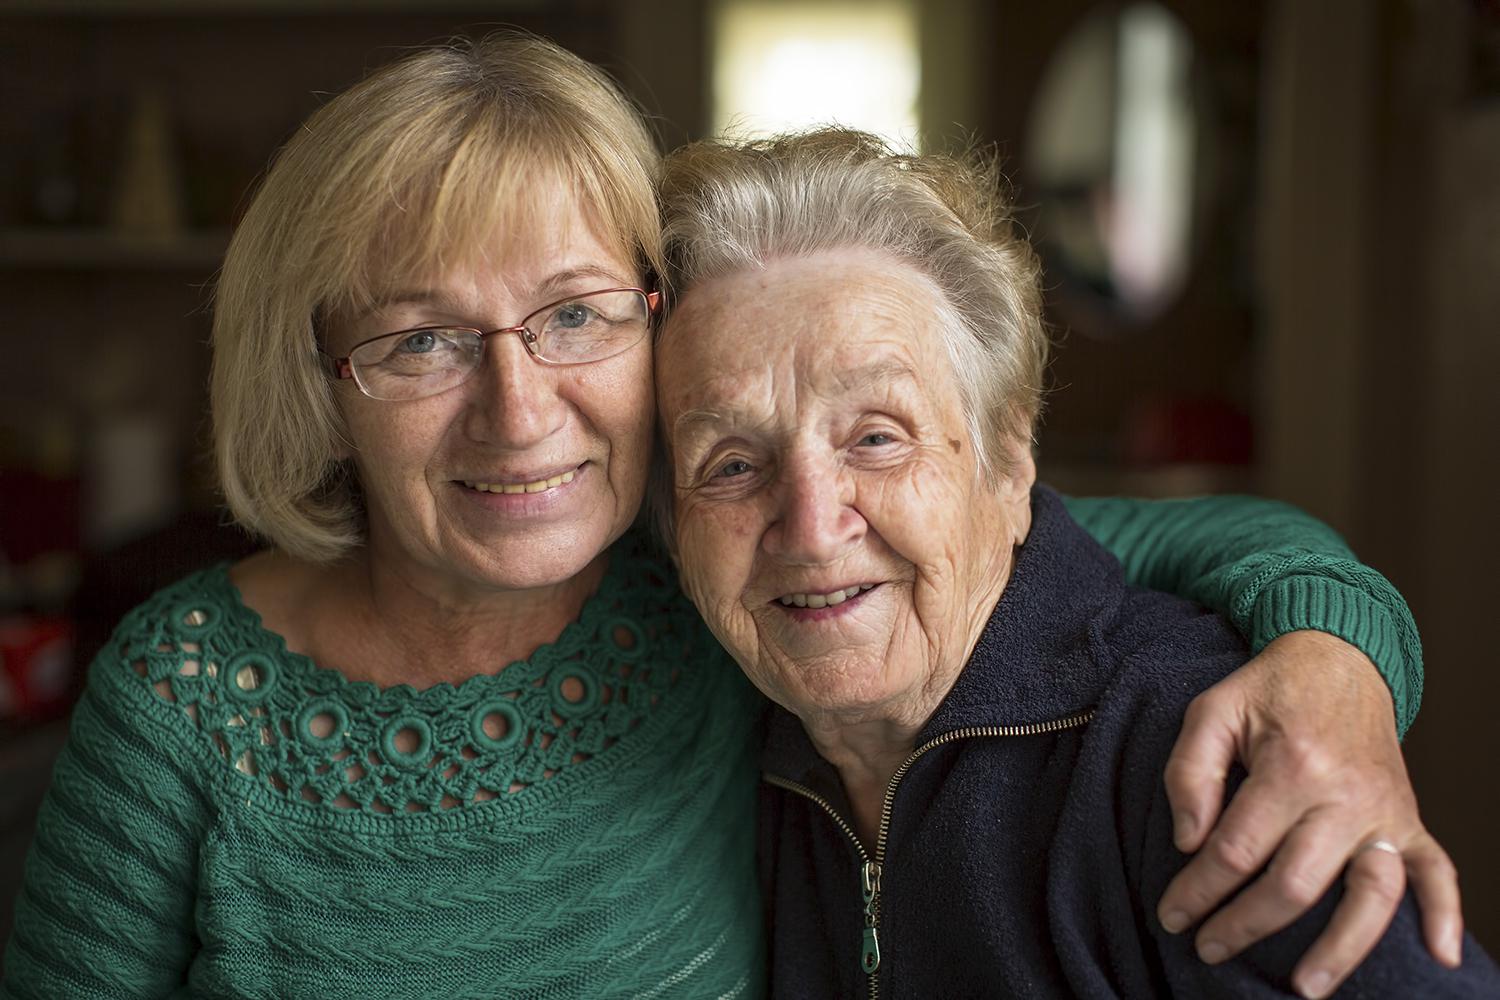 A mature woman has her arm around her aging mother as they smile at the camera.